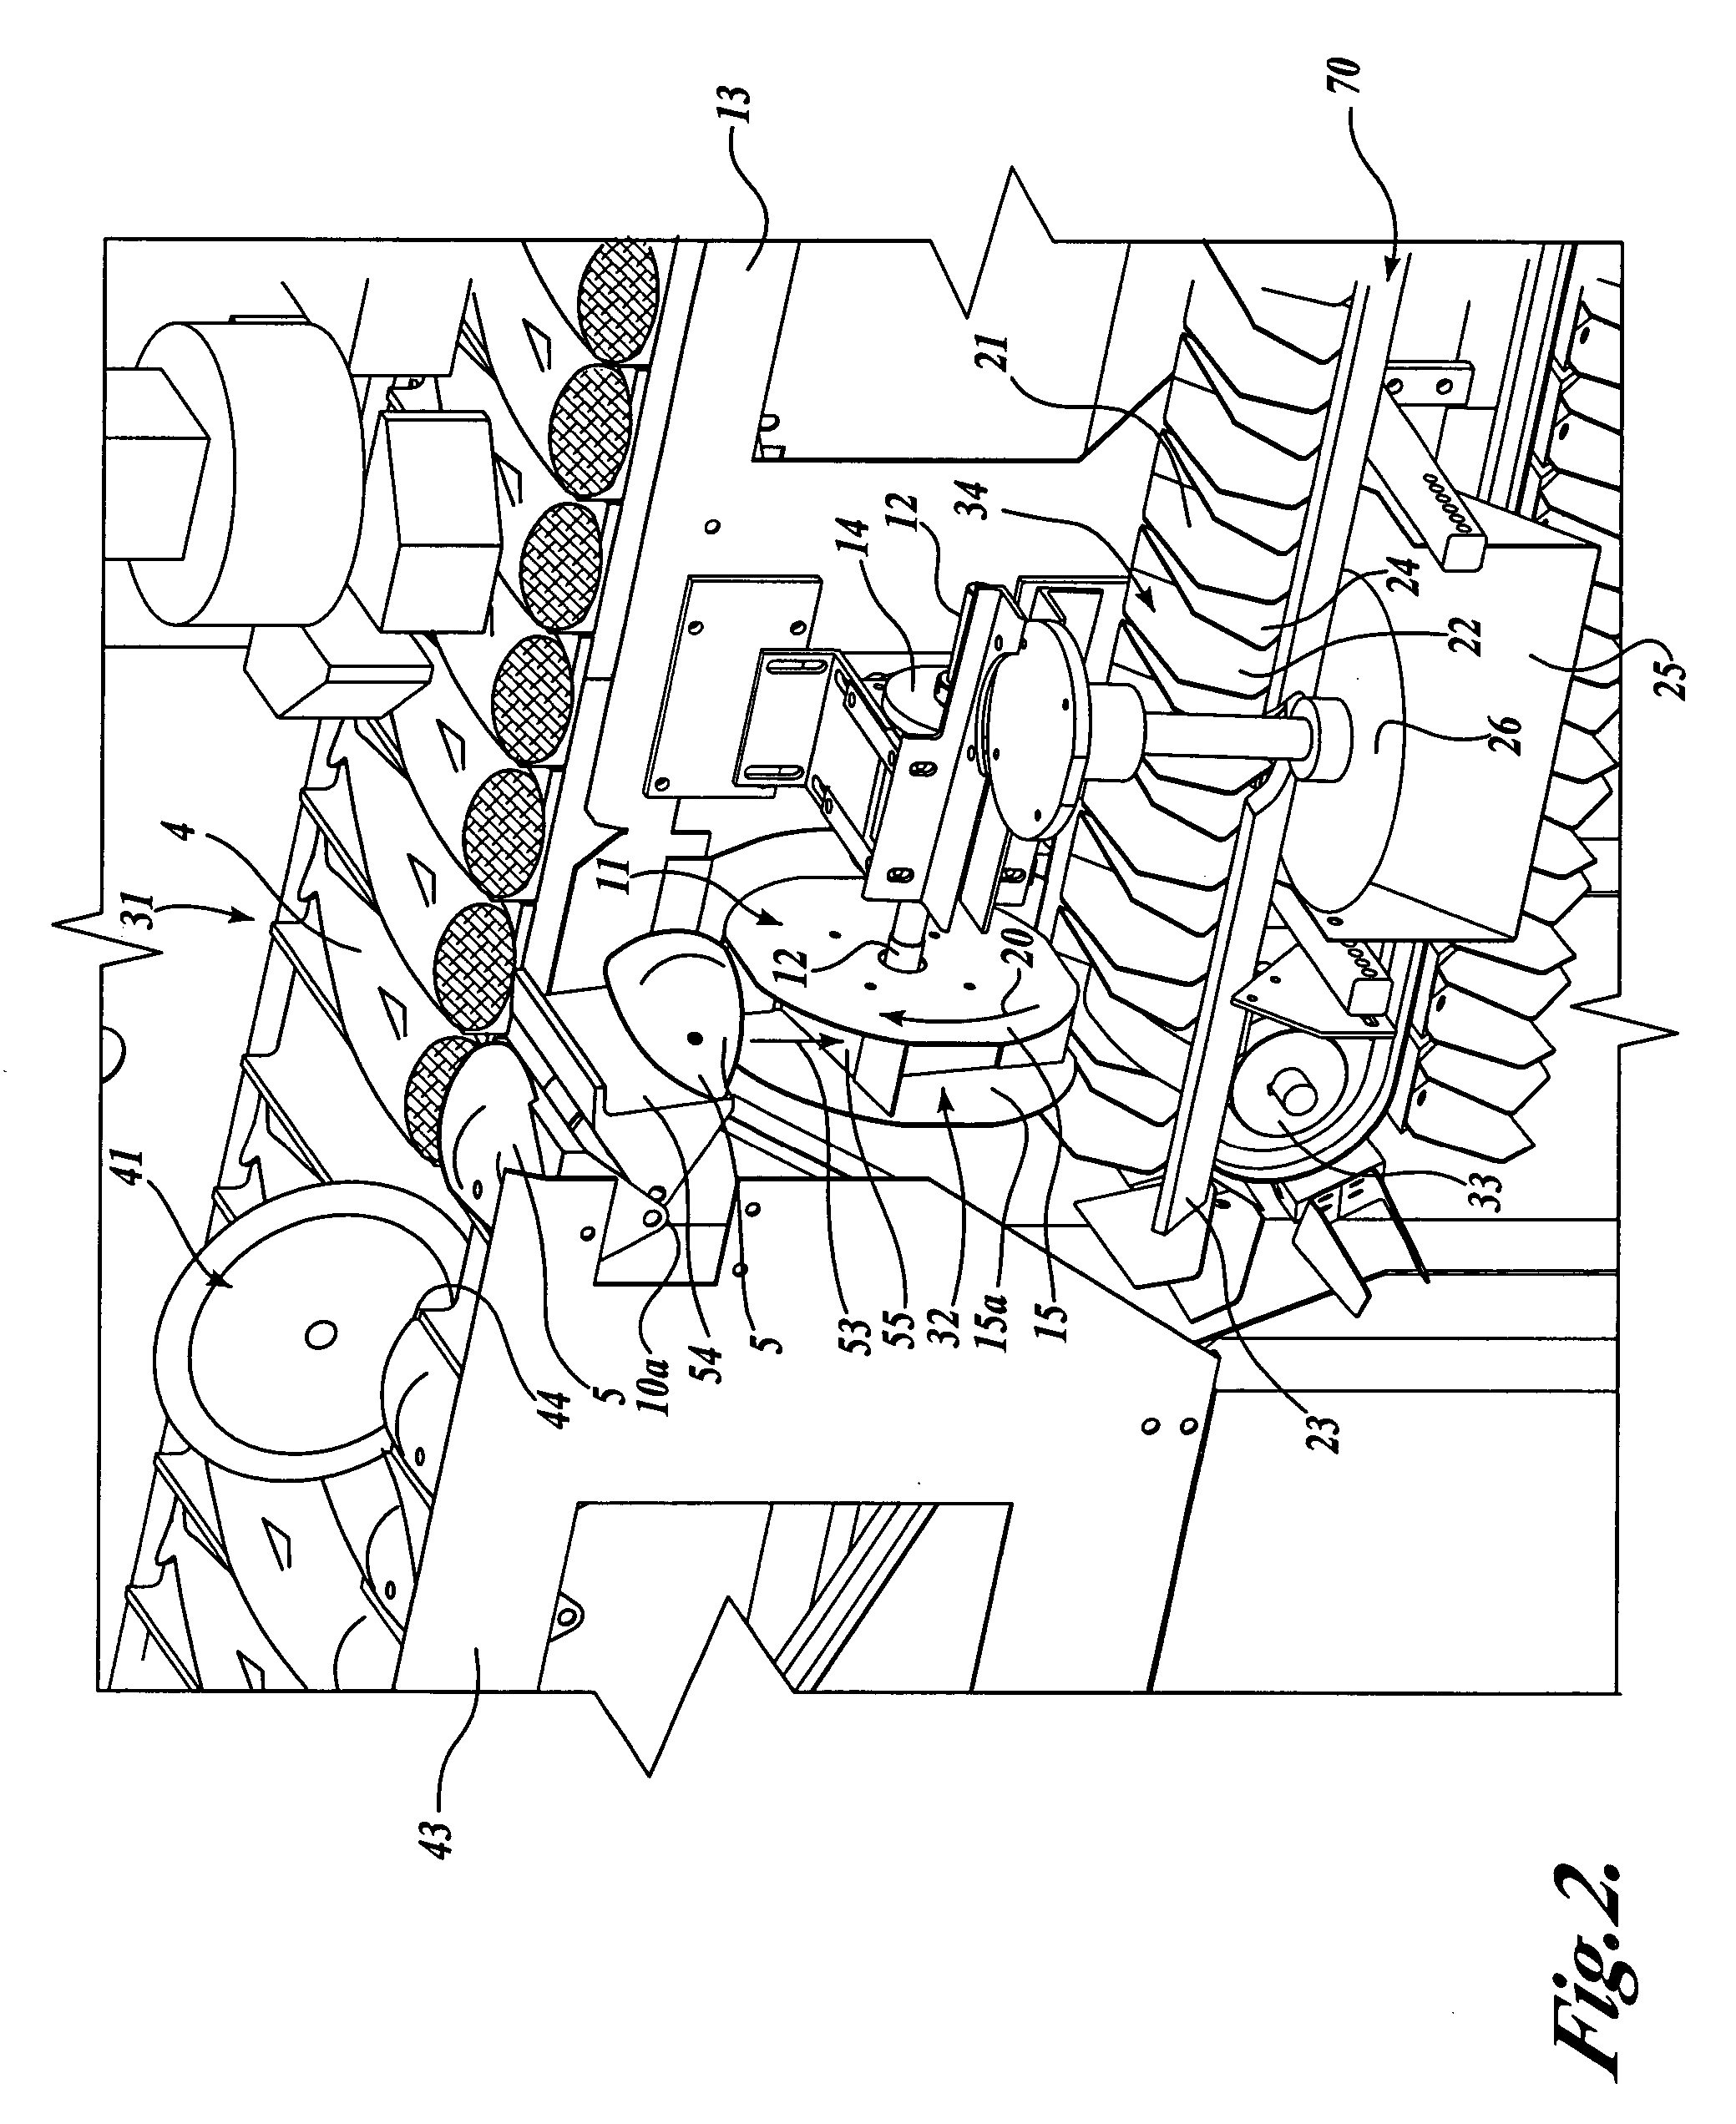 Apparatus and method for recovering neck meat from a fish